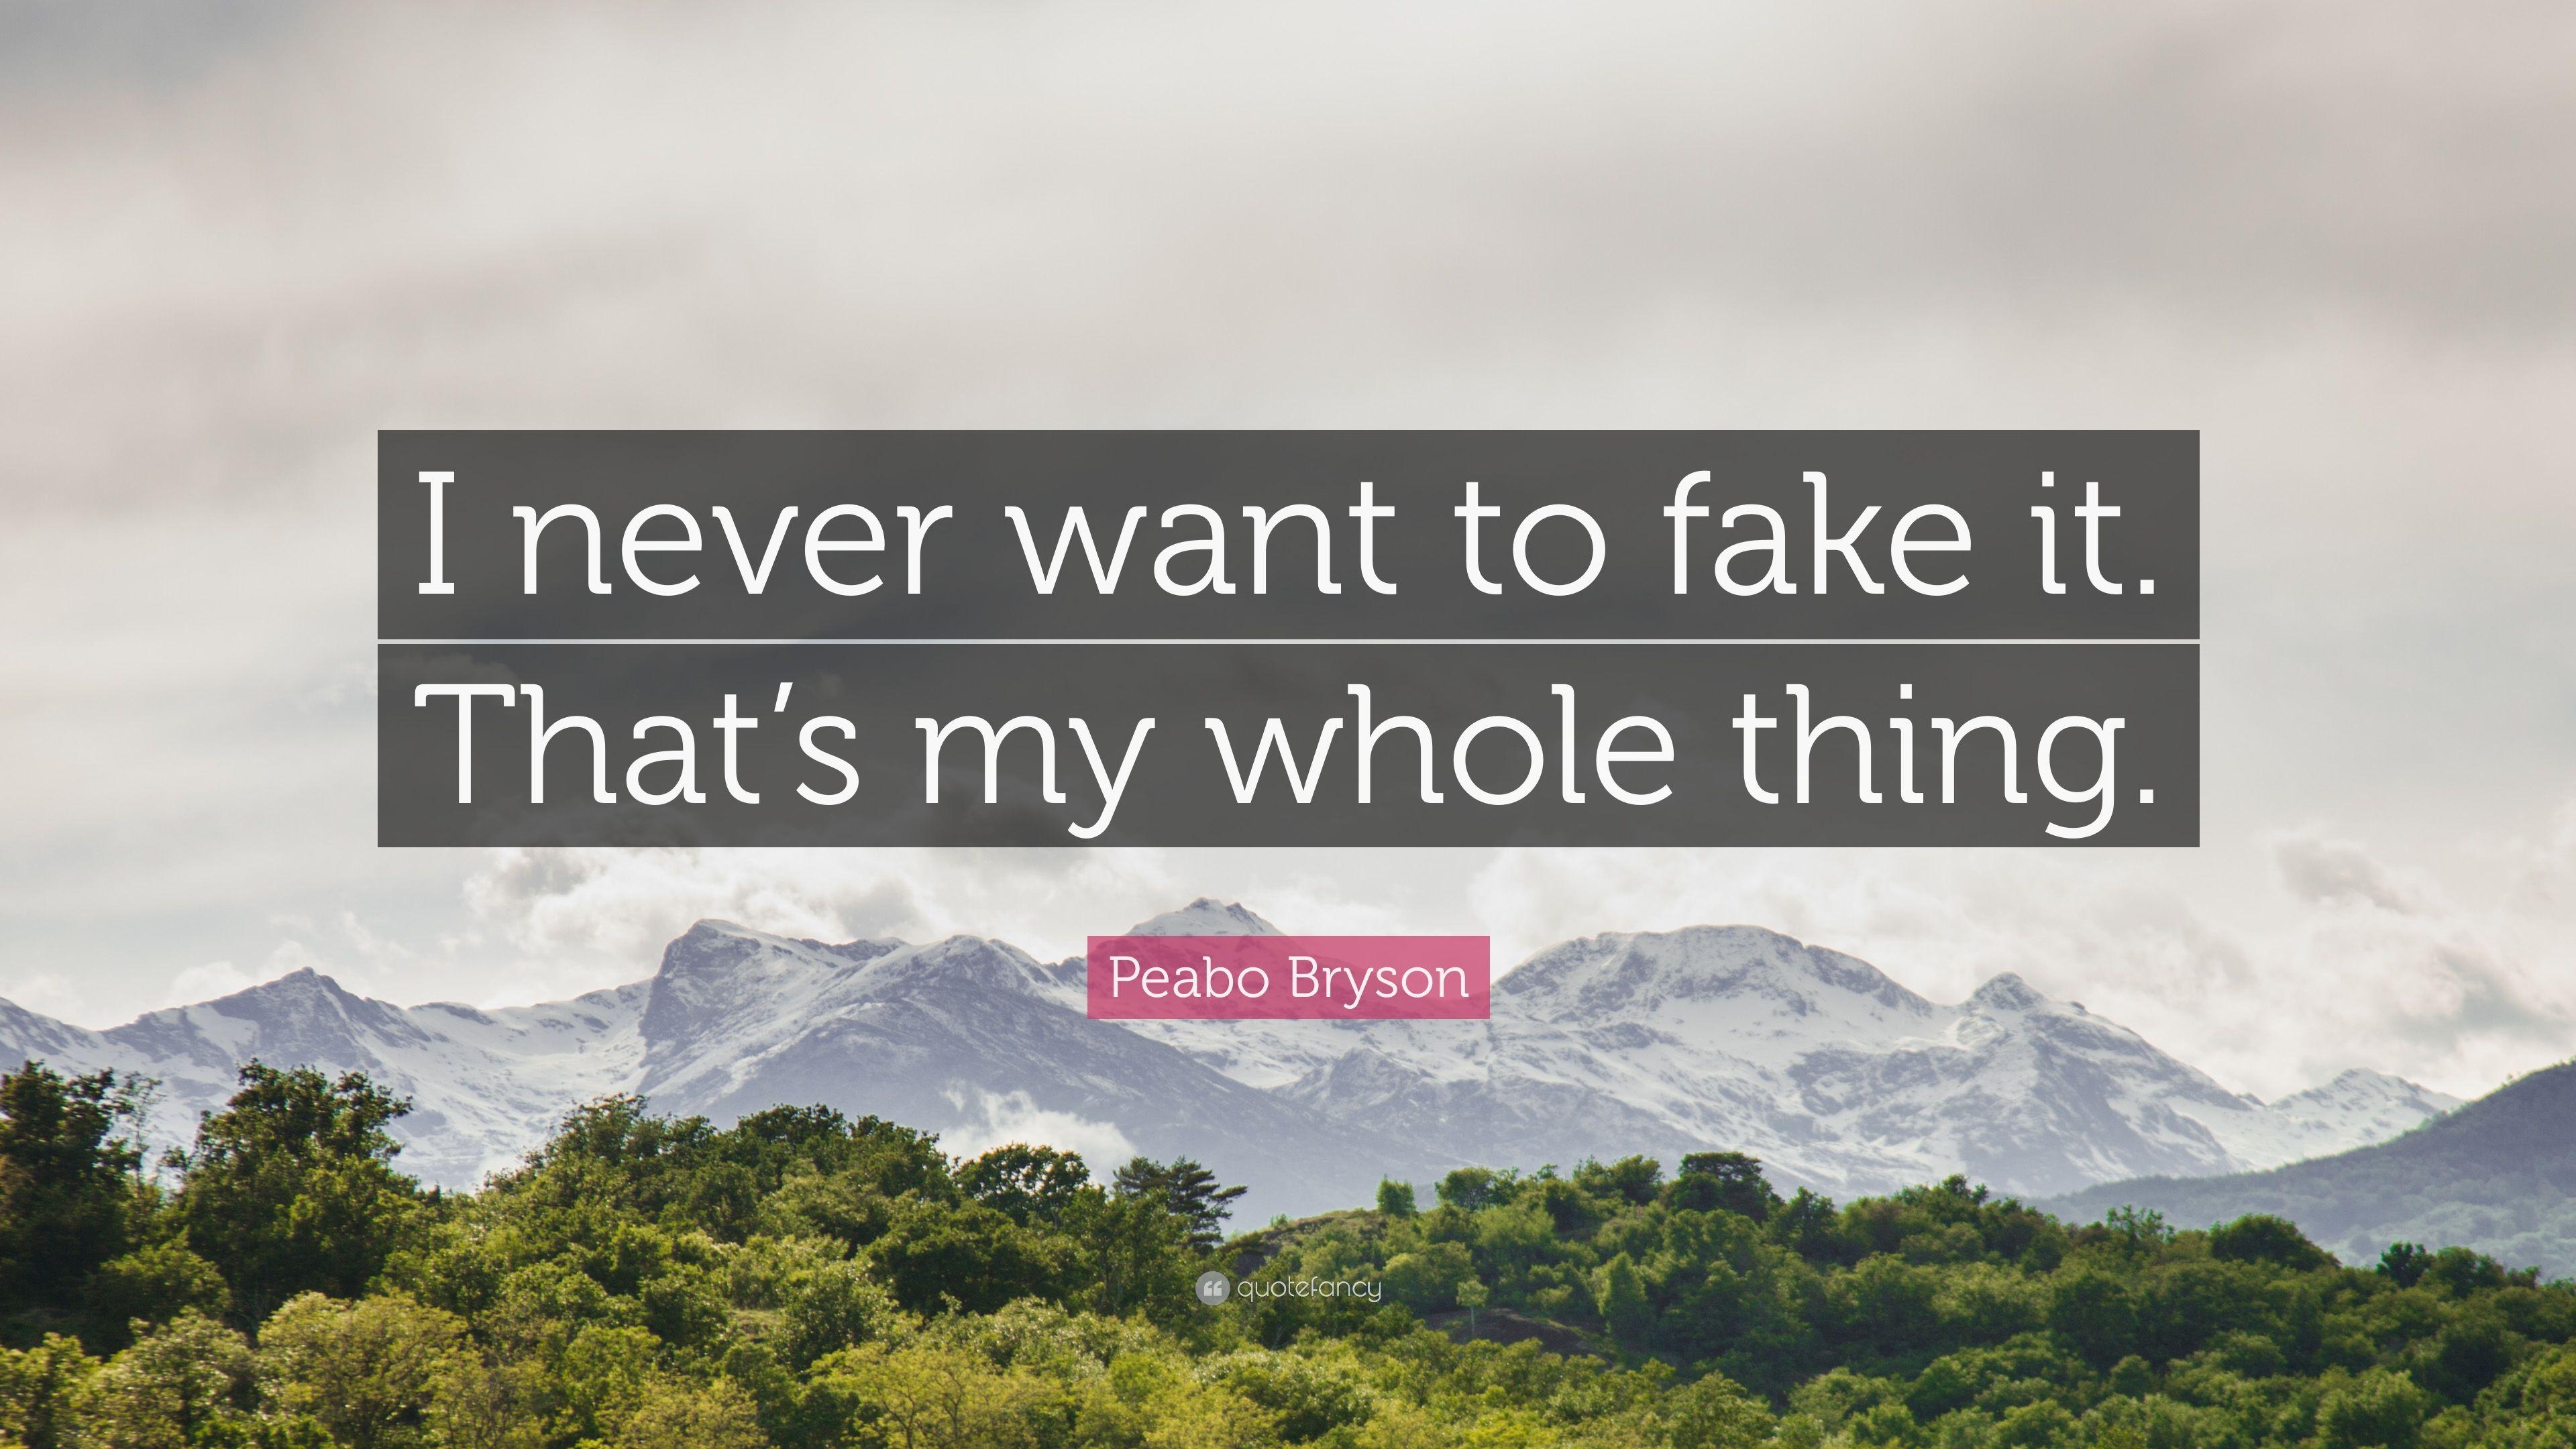 Peabo Bryson Quote: “I never want to fake it. That's my whole thing